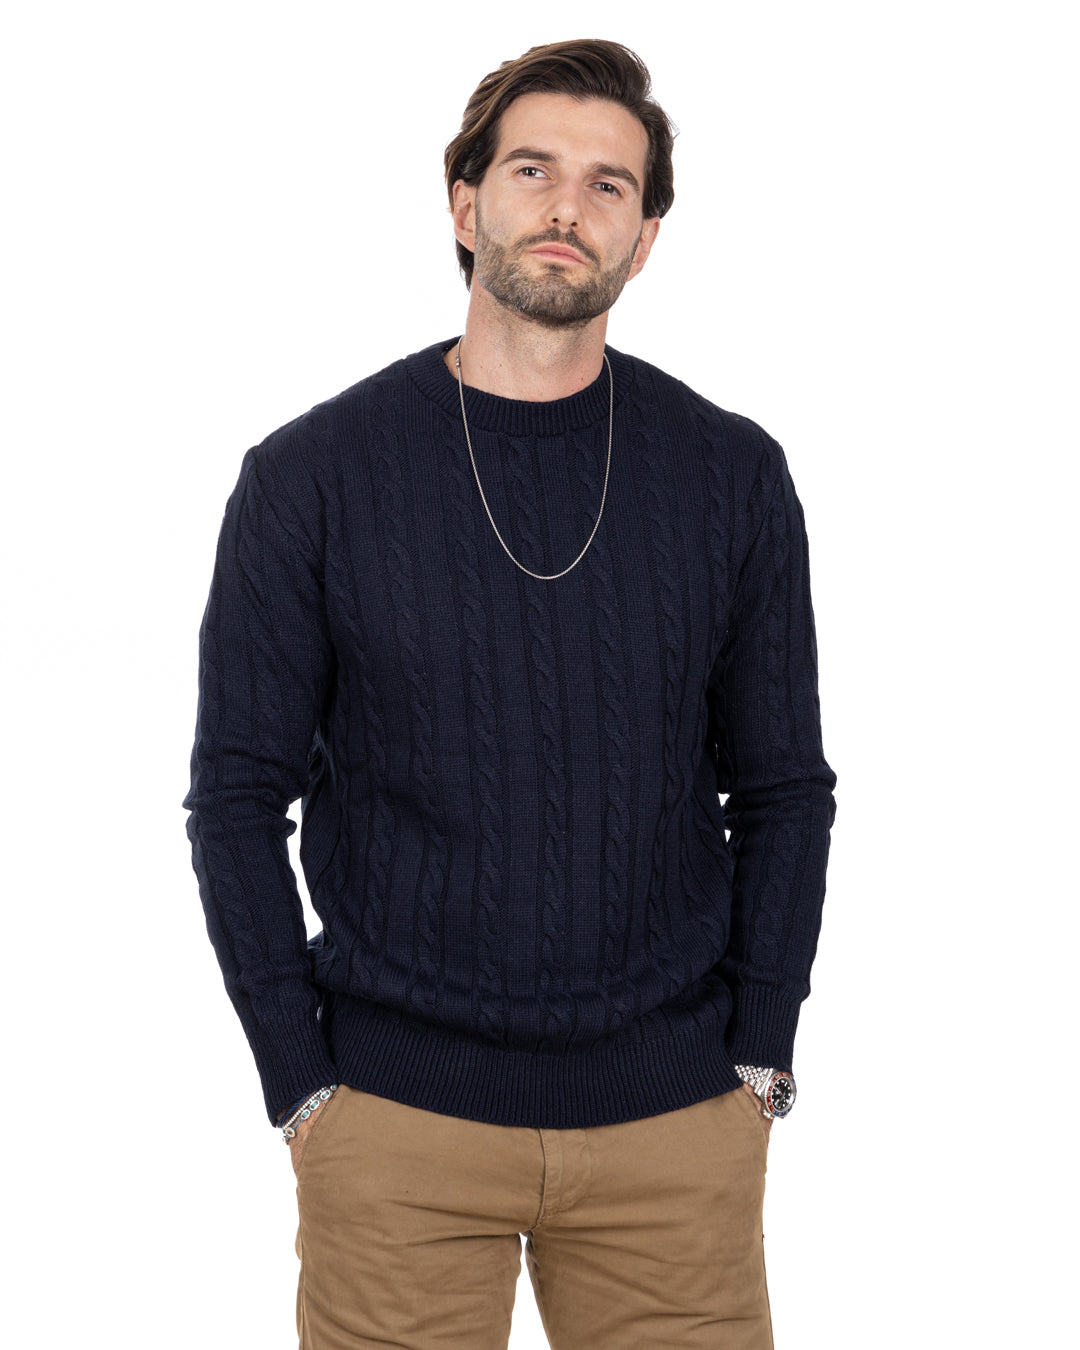 Stirling - blue sweater with cables